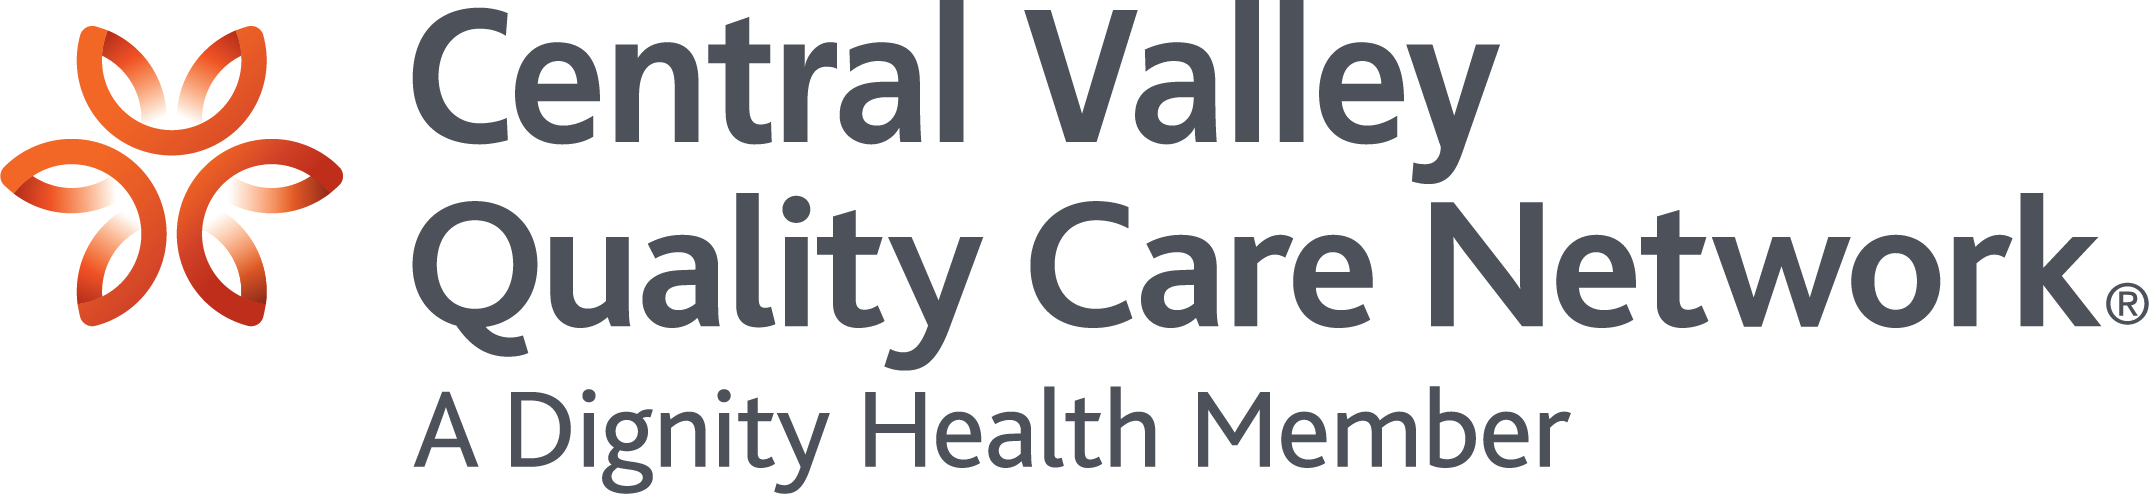 Central Valley Quality Care Network